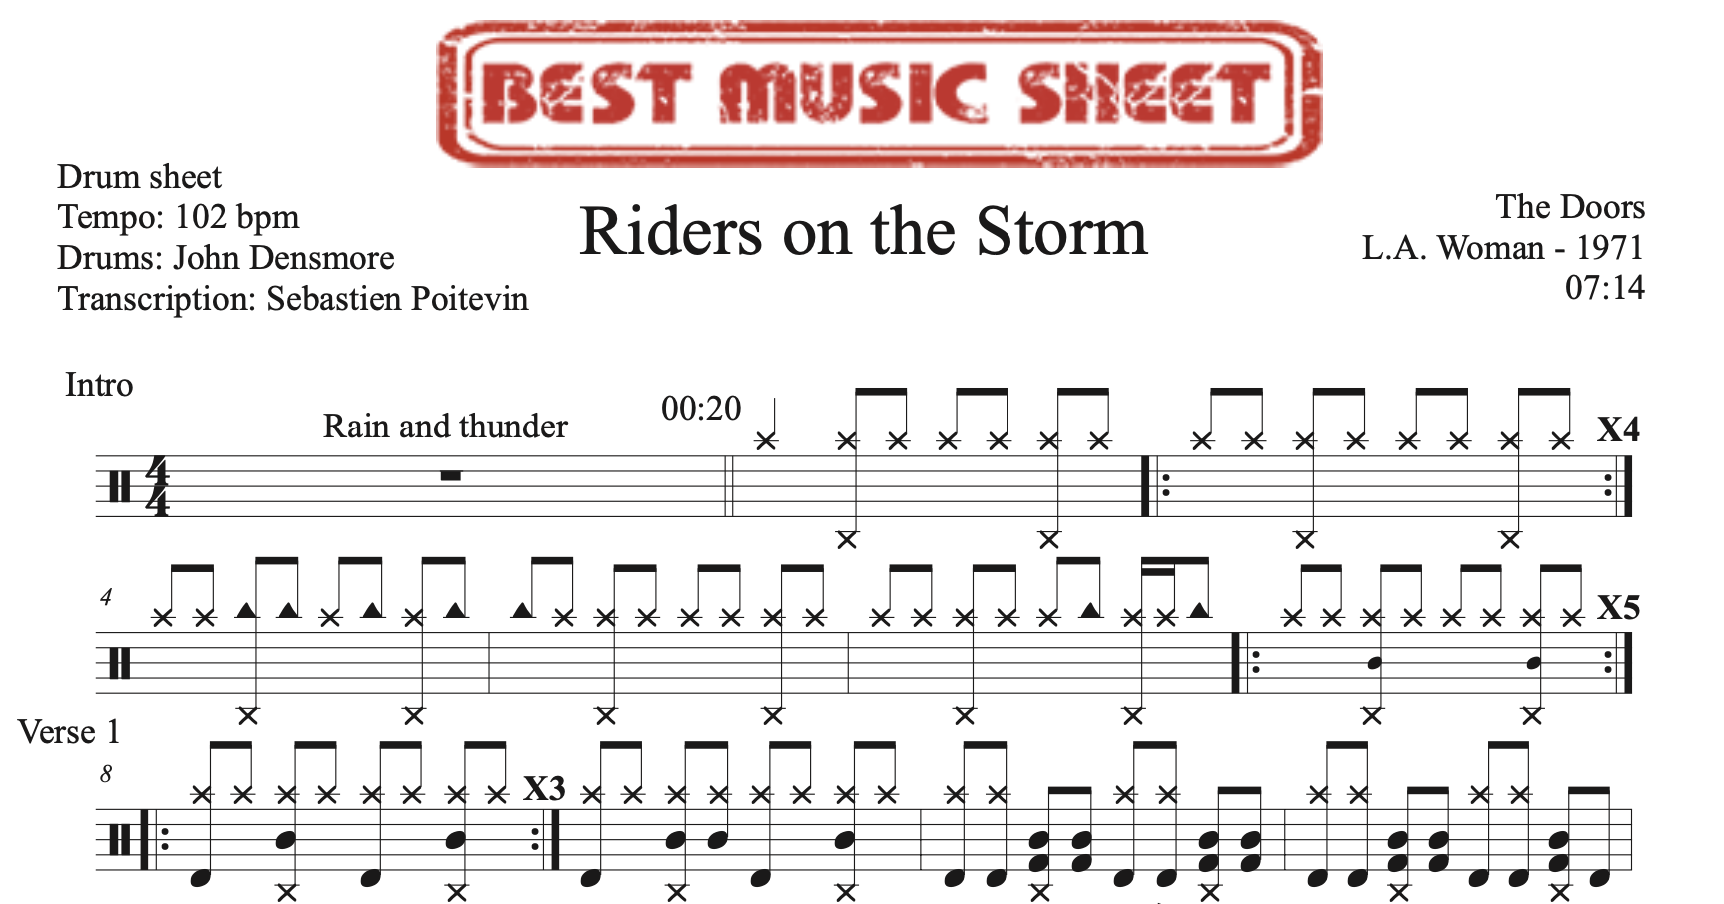 Sample drum sheet of Riders on the Storm by The Doors